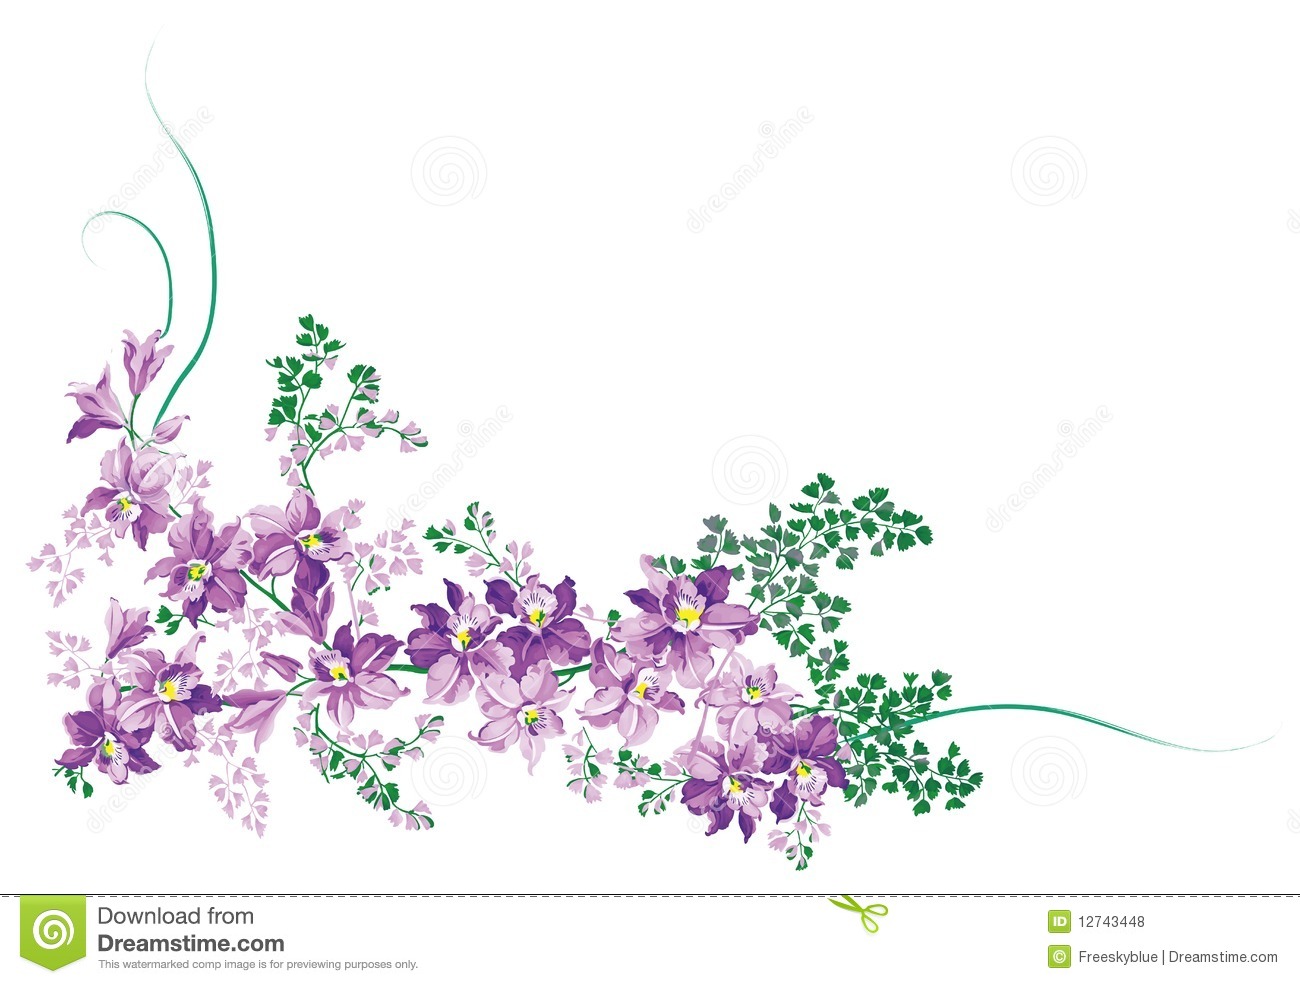 Flower Vine Drawing at GetDrawings.com | Free for personal ...